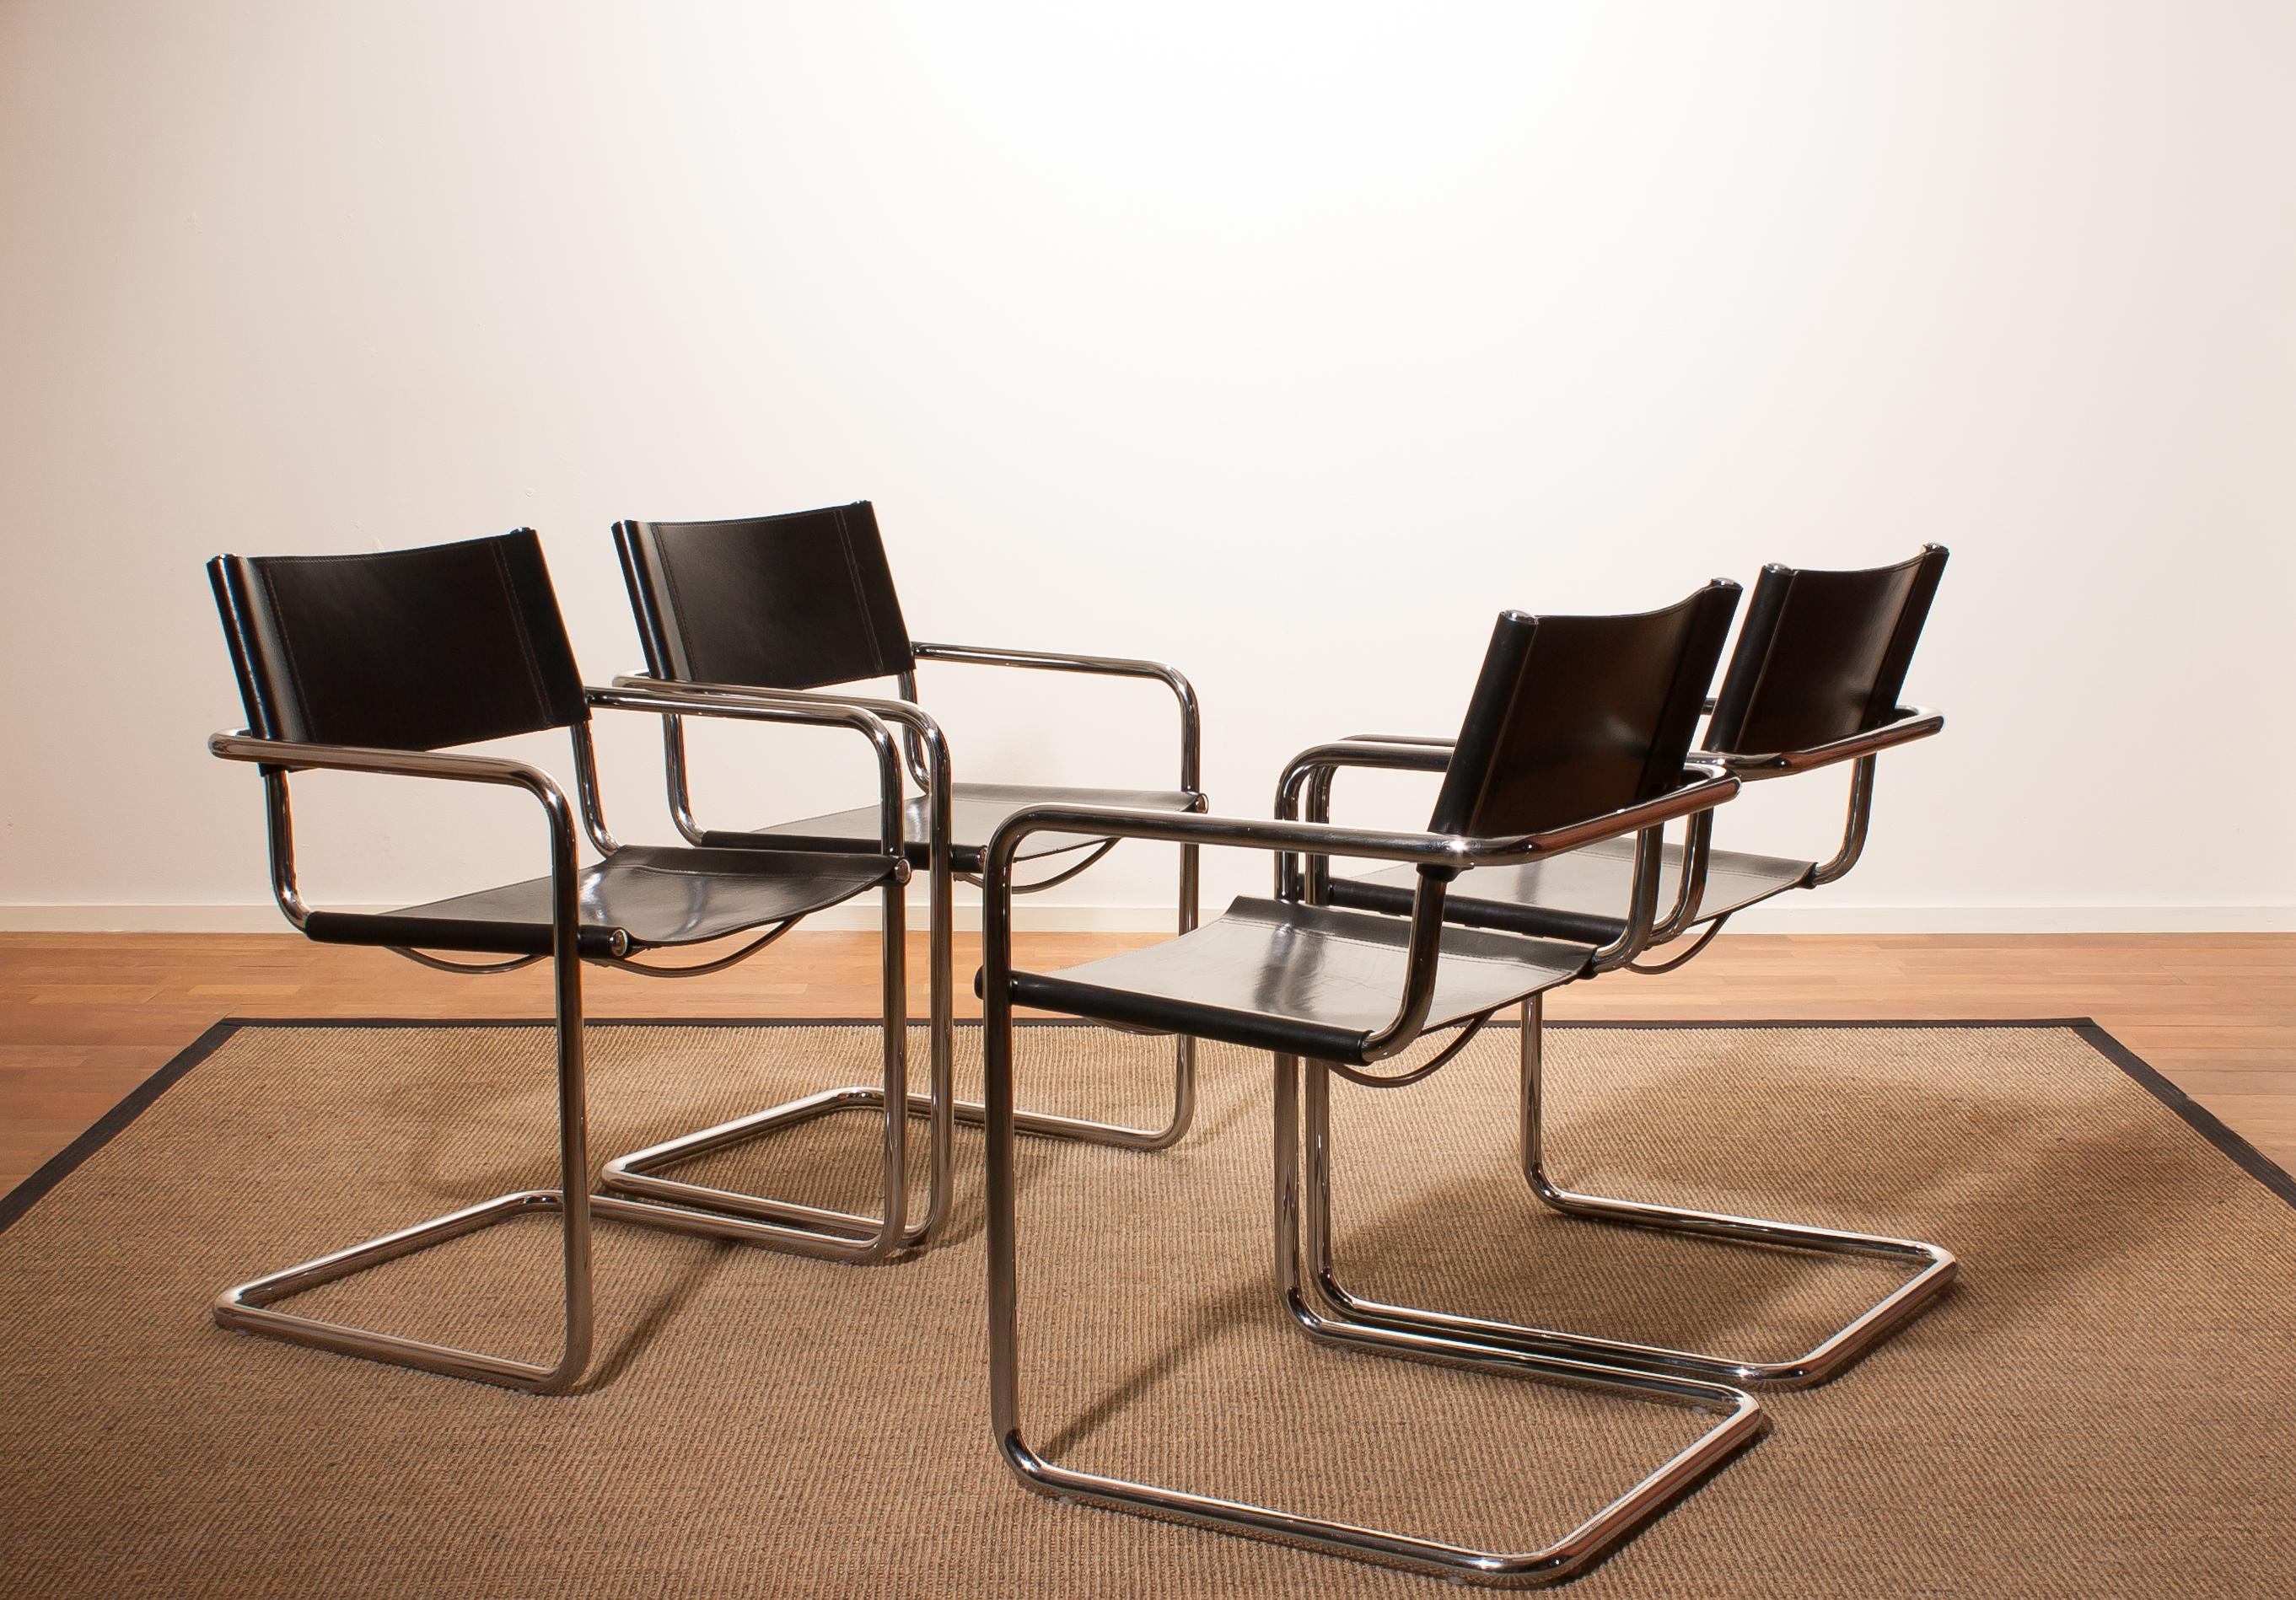 Italian 1970s, Set of Four MG5 Black Leather Dining / Office Chairs by Matteo Grassi